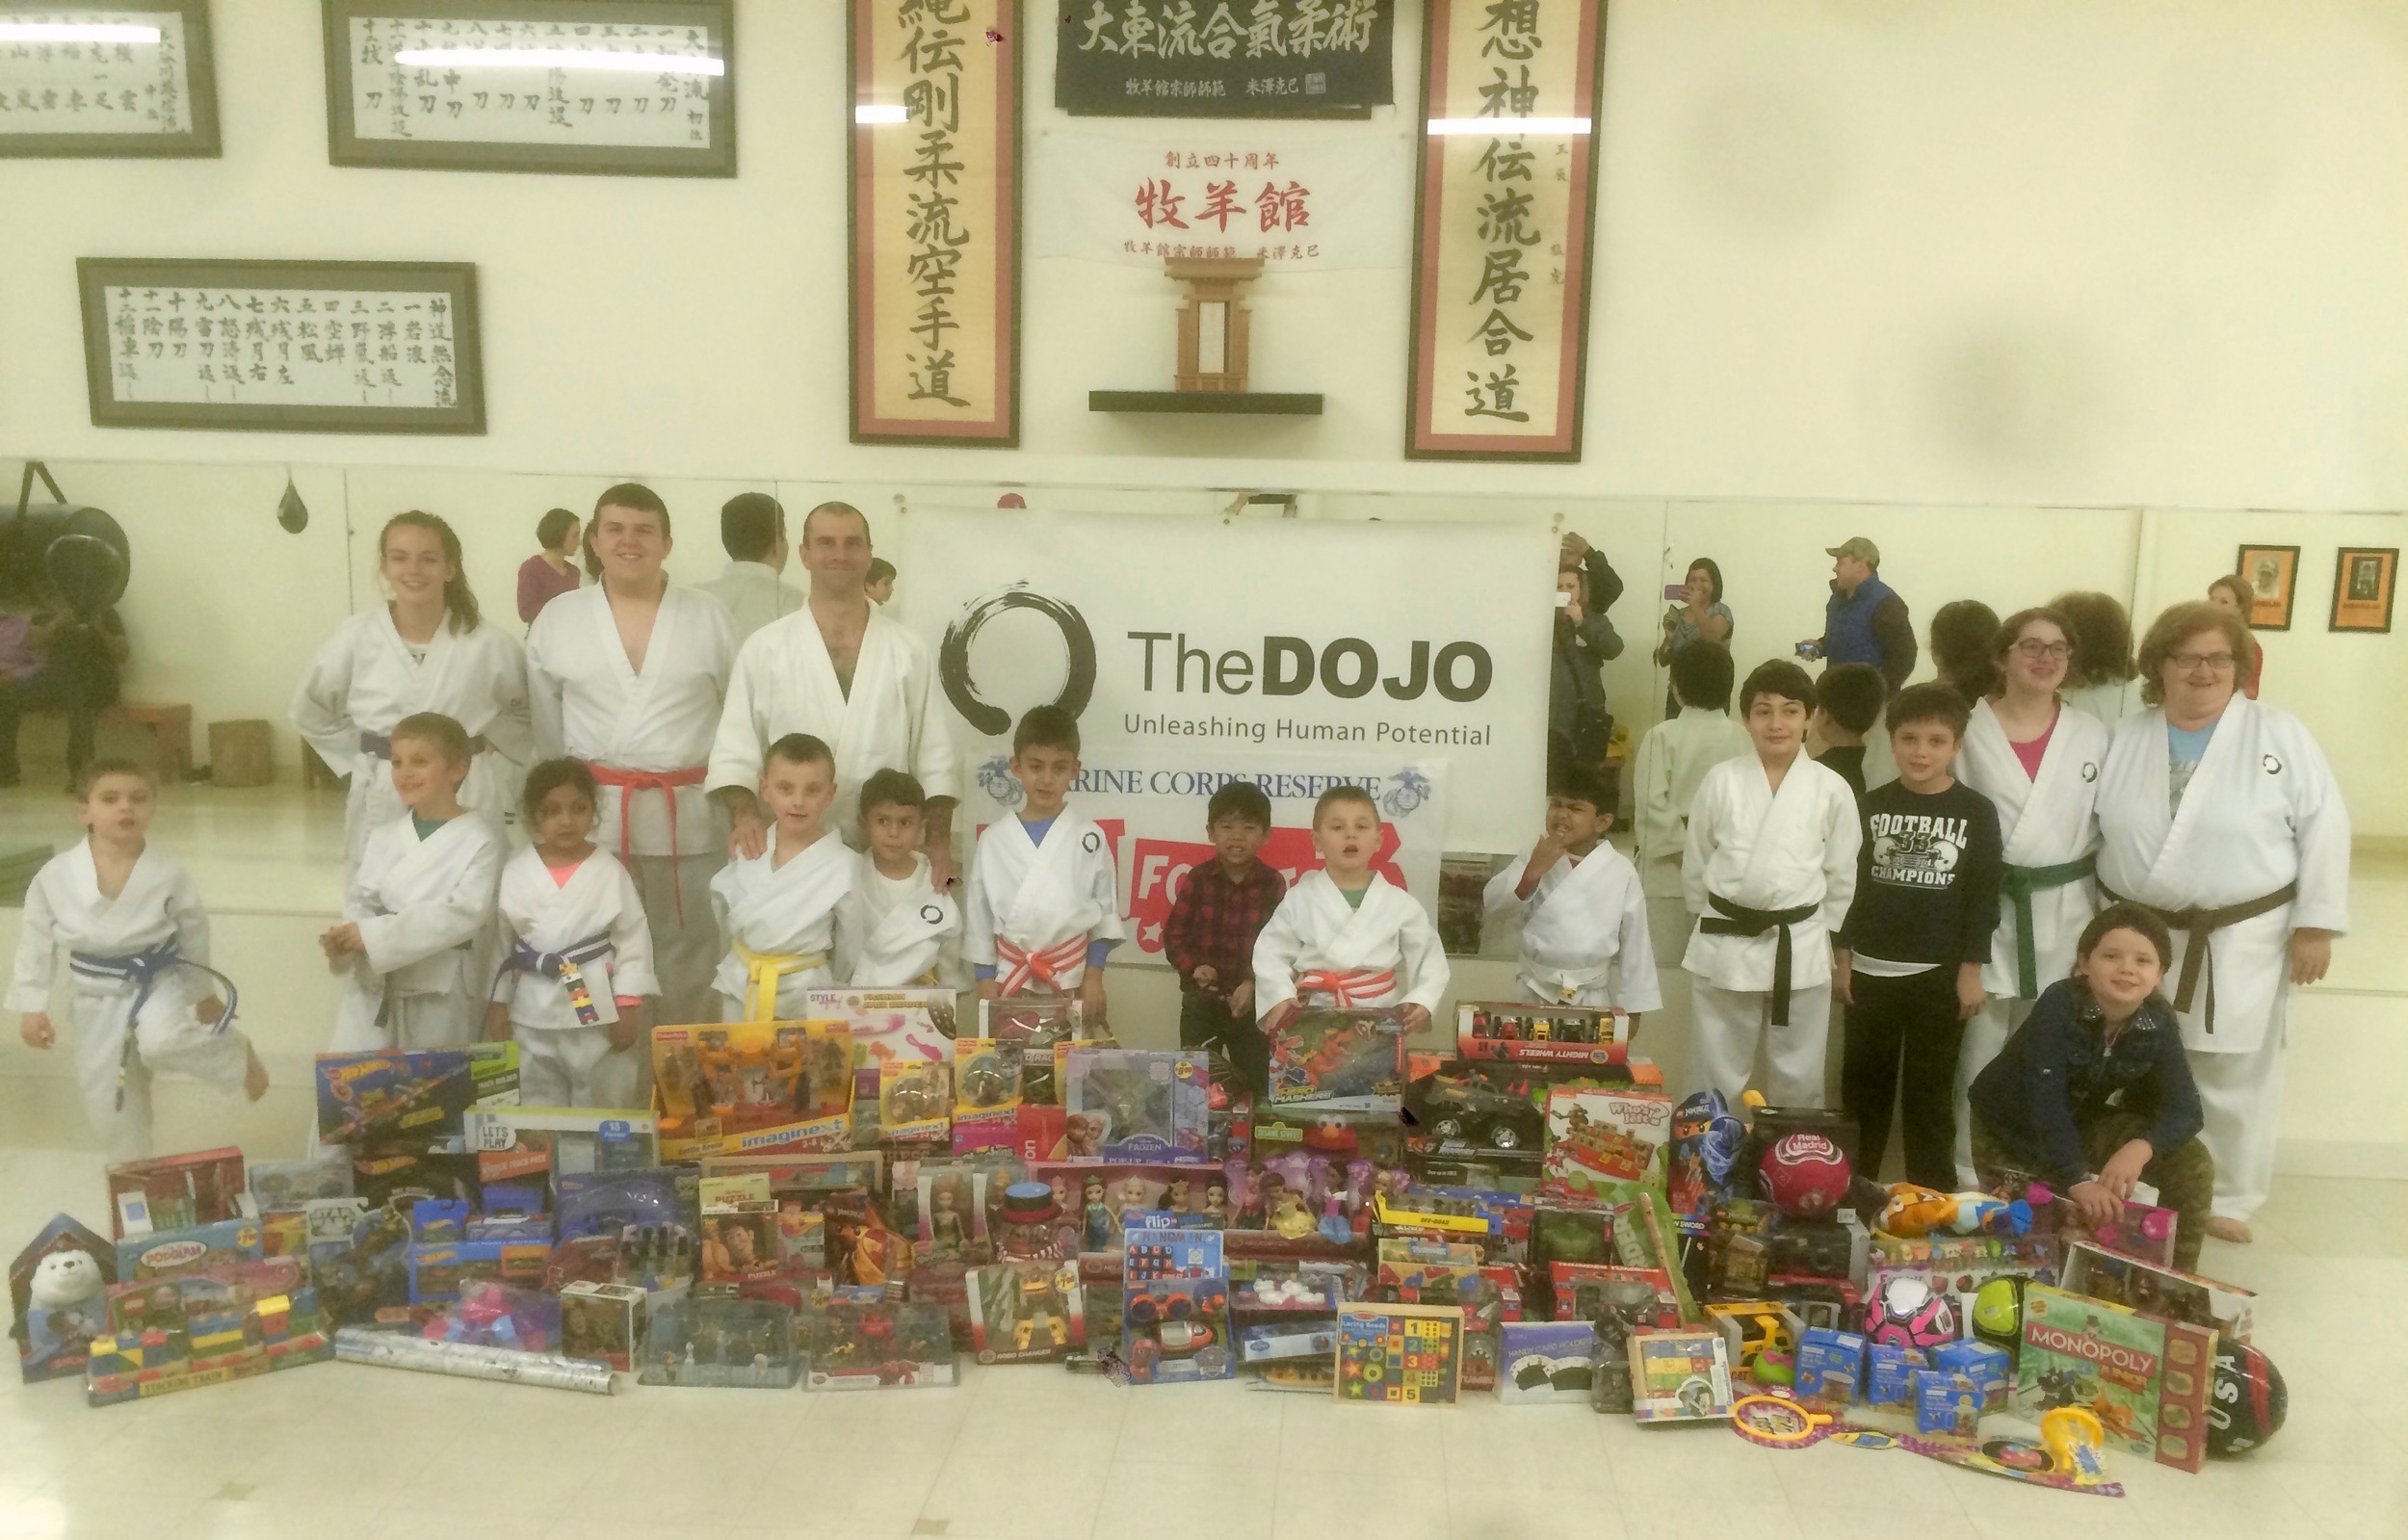 toys-for-tots---thedojo-toy-drive_23747334681_o.jpg